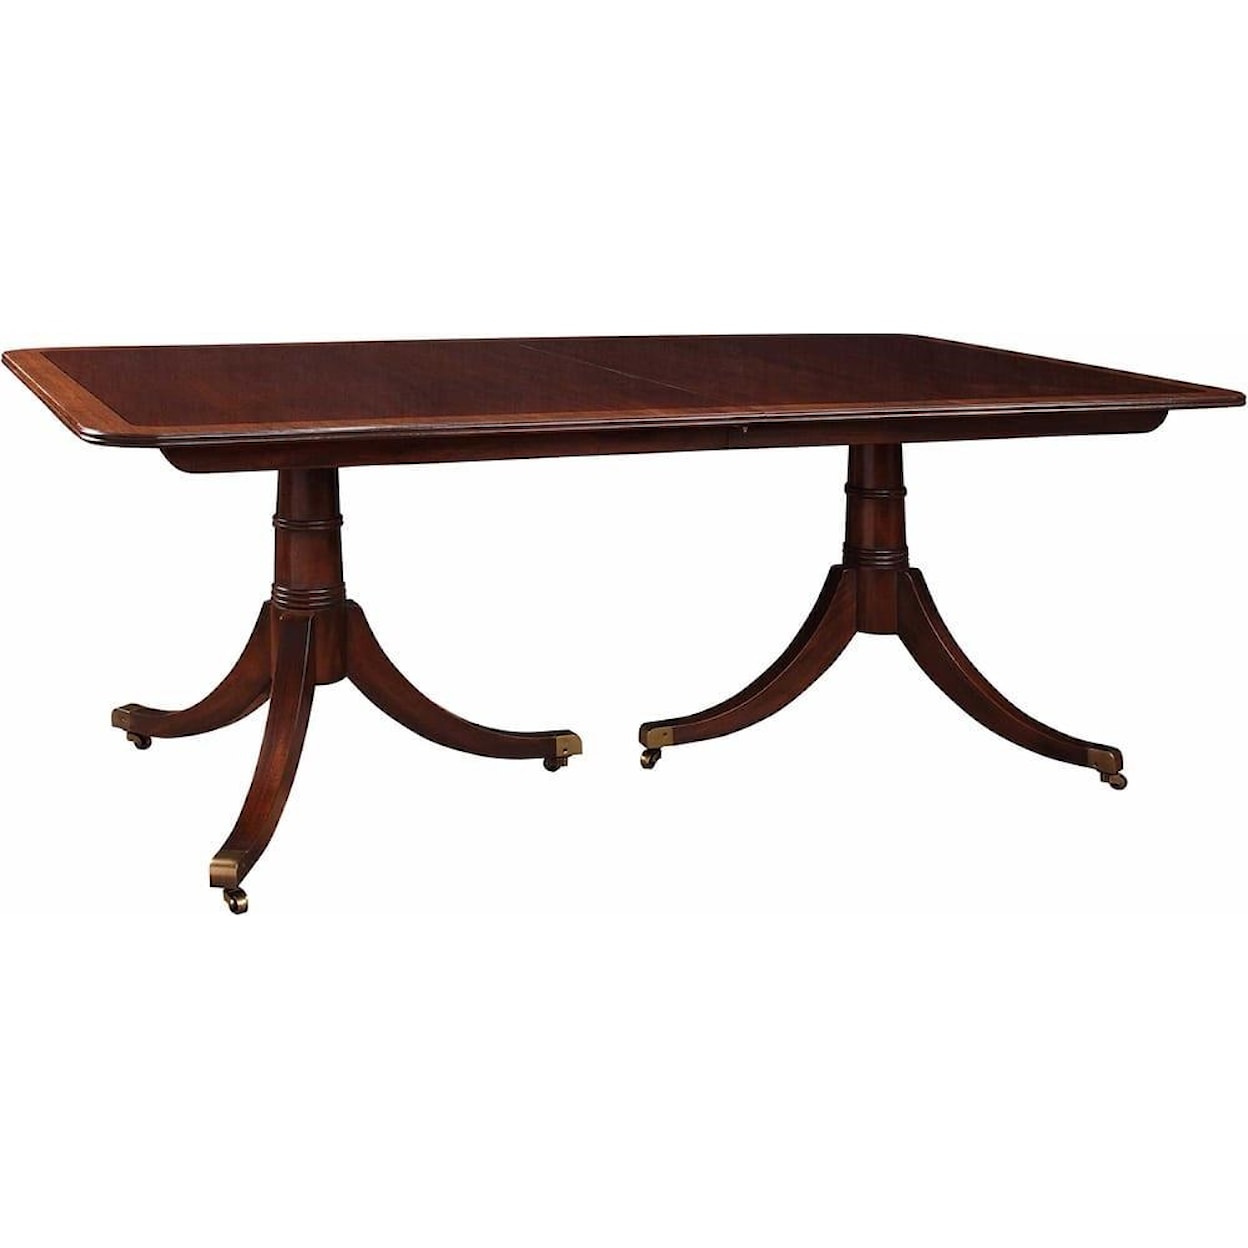 Stickley Classics Cherry and Mahogany Haverford Dining Table